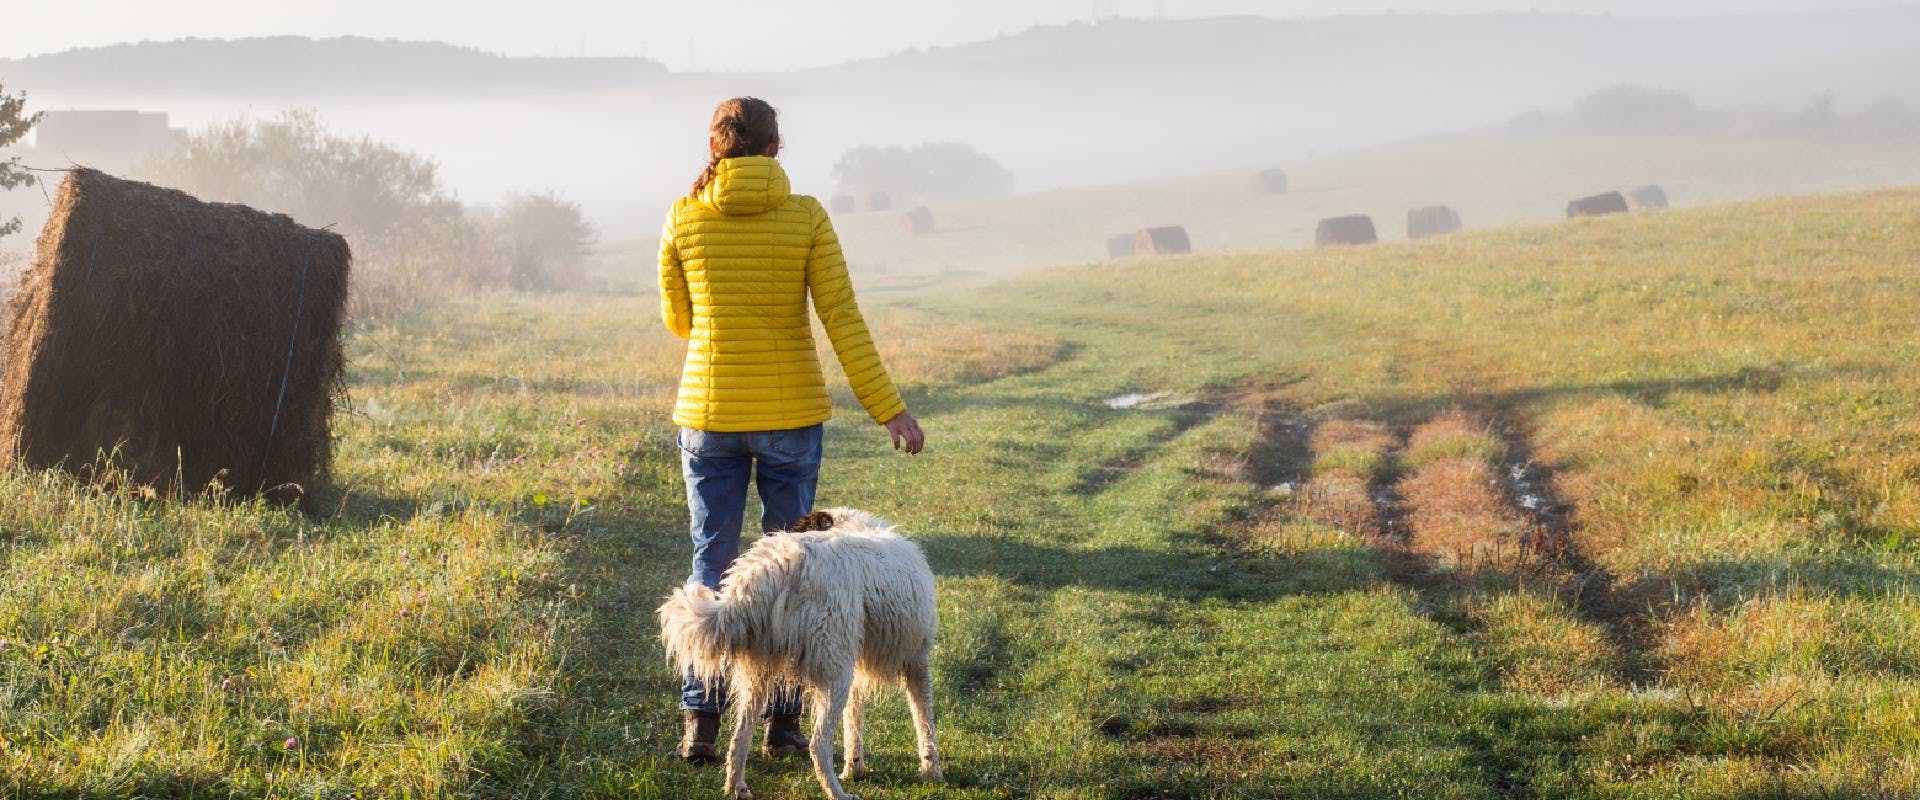 Person in foggy countryside with a dog